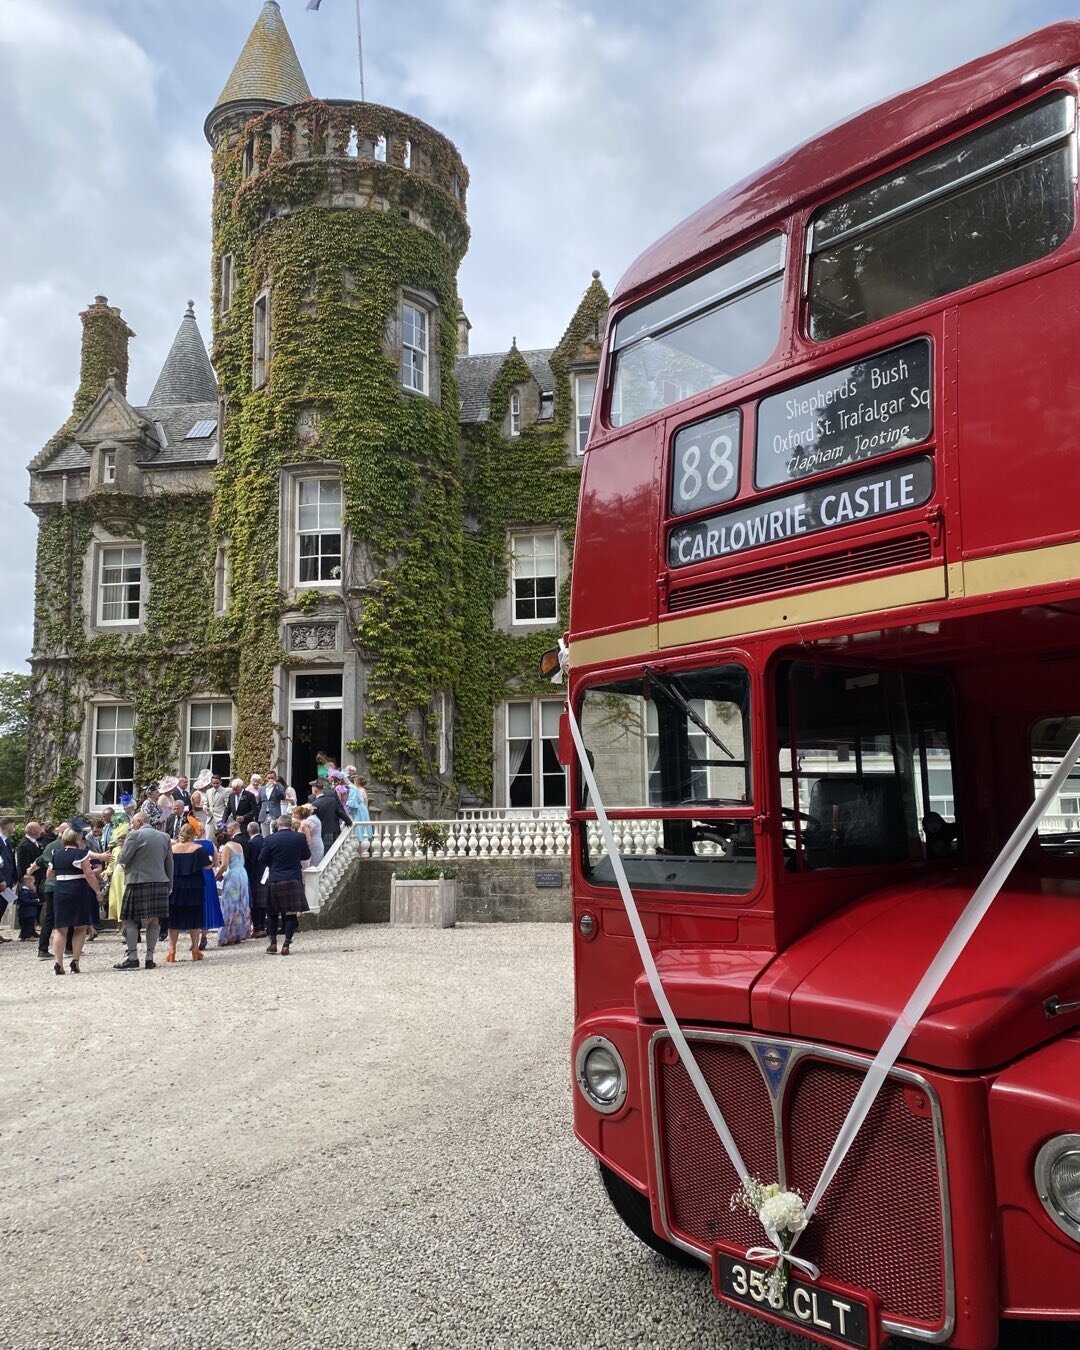 Going to the @carlowrie_castle Wedding Open Day on Sunday 25th February? Come and say hello to us at The Red Bus - you can&rsquo;t miss us!
.
.
.
.
.
#weddinginspiration #dreamweddings #vintageweddings #vintagestyle #vintagetransport #carlowriecastle